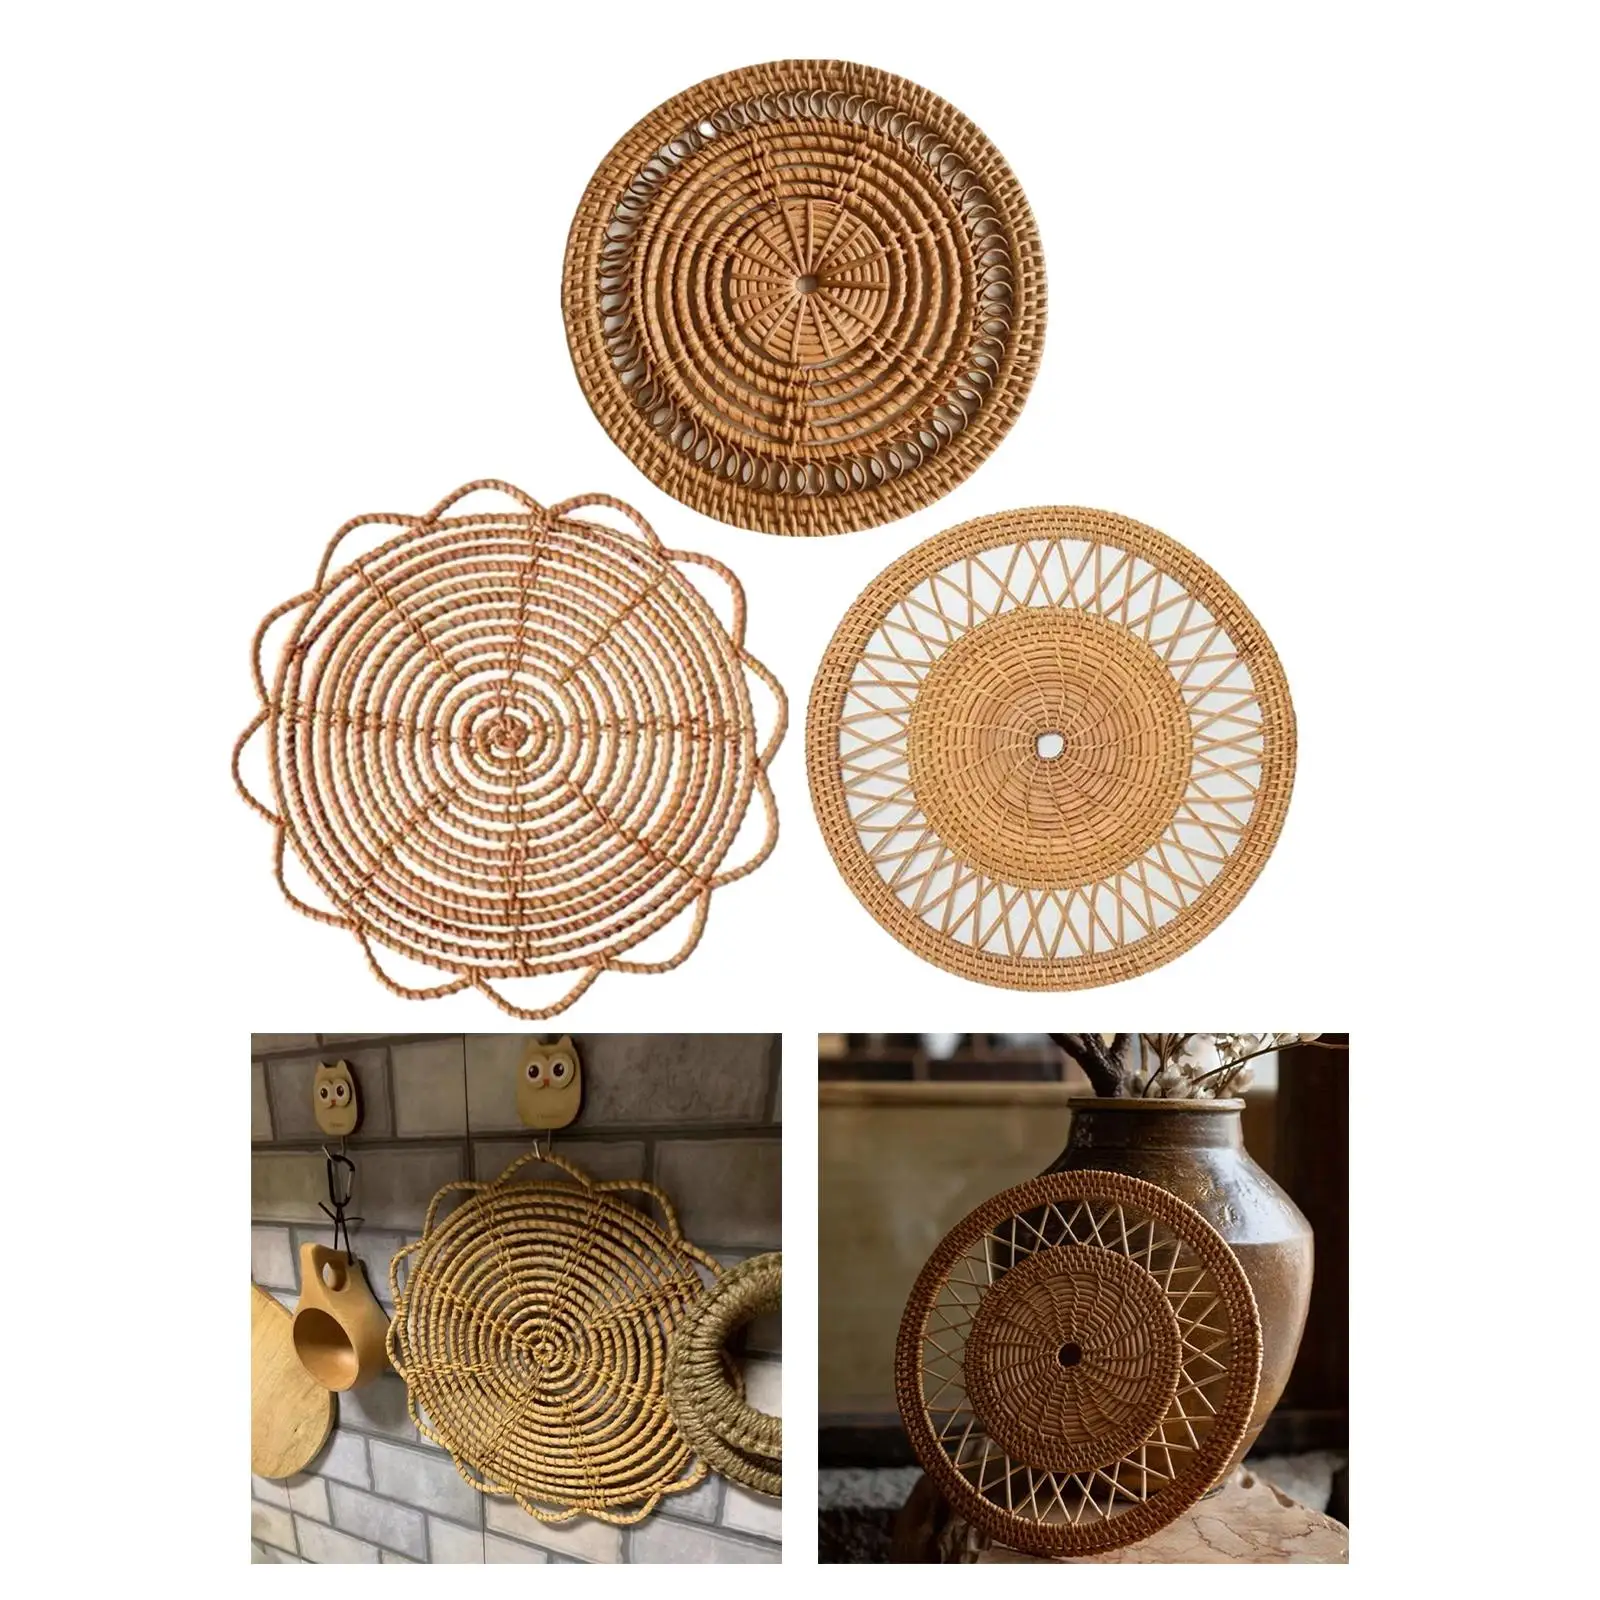 Wall Art Mural Basket Decor Bowl Mats Coasters for Living Room Bed Room